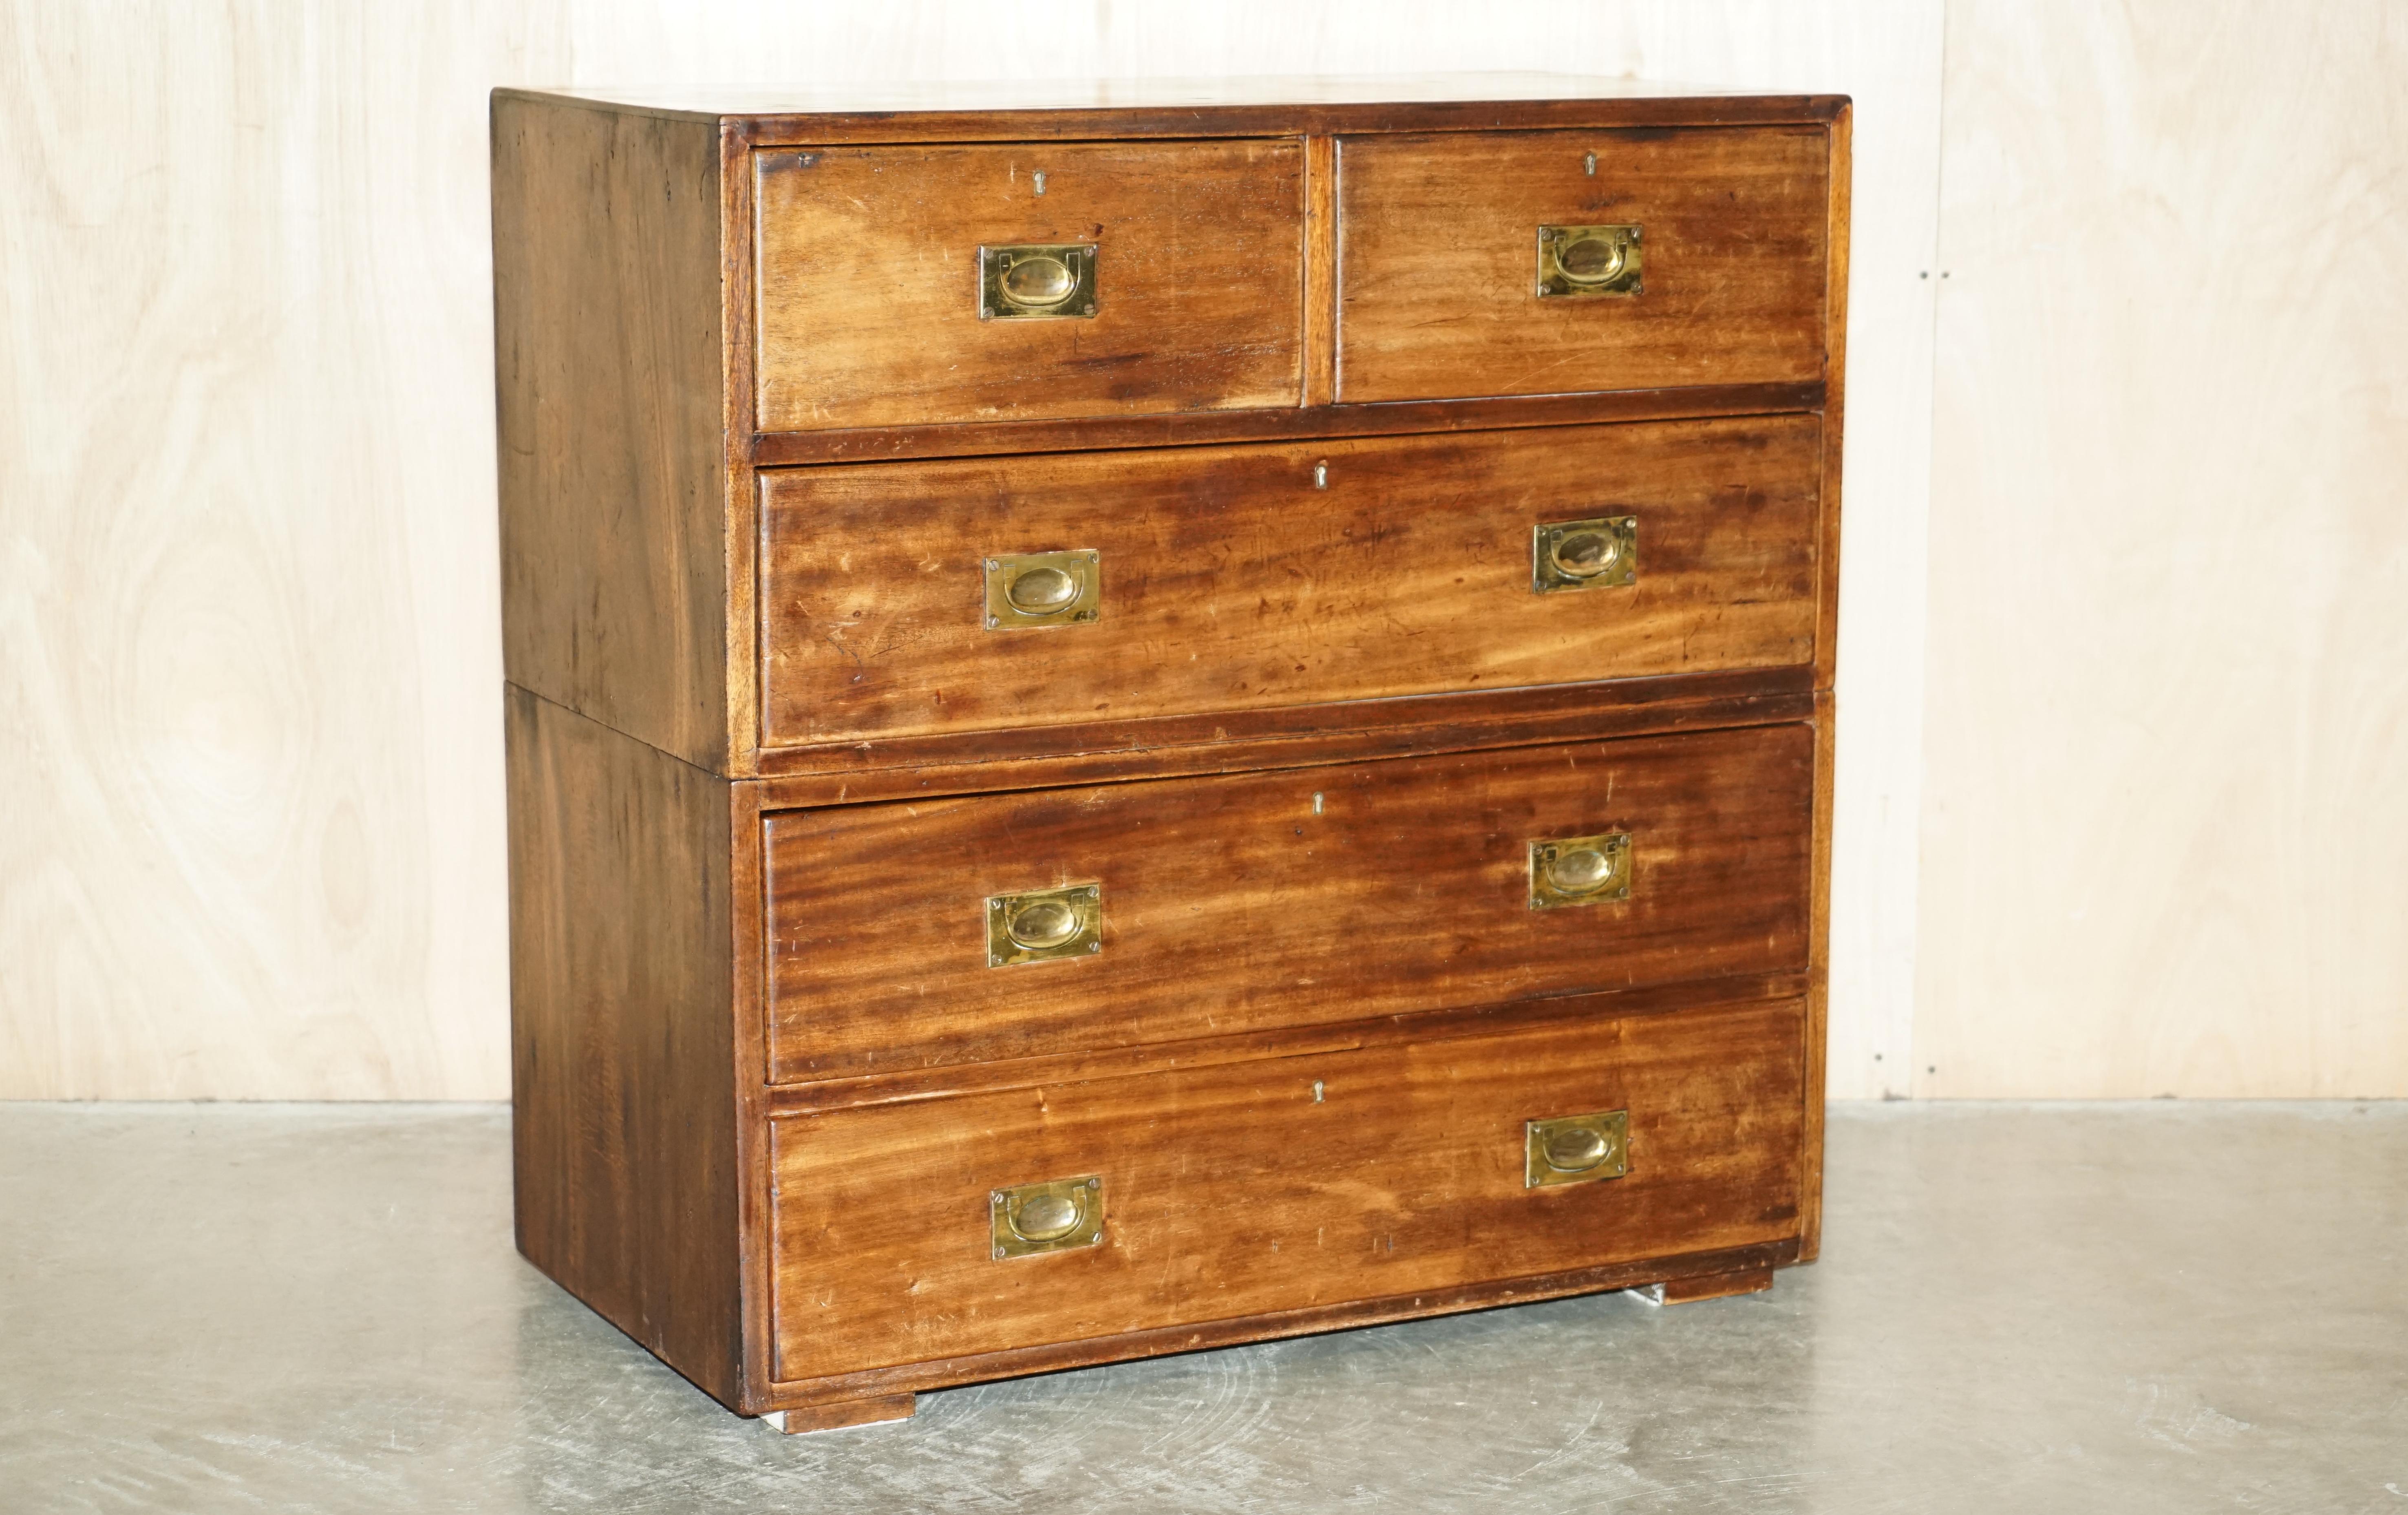 We are delighted to offer for sale this rare and solid Mahogany Military Officers Campaign chest of drawers.

If you’re in the market for a super original Campaign chest of drawers then look no further, this piece is wonderful, totally unrestored